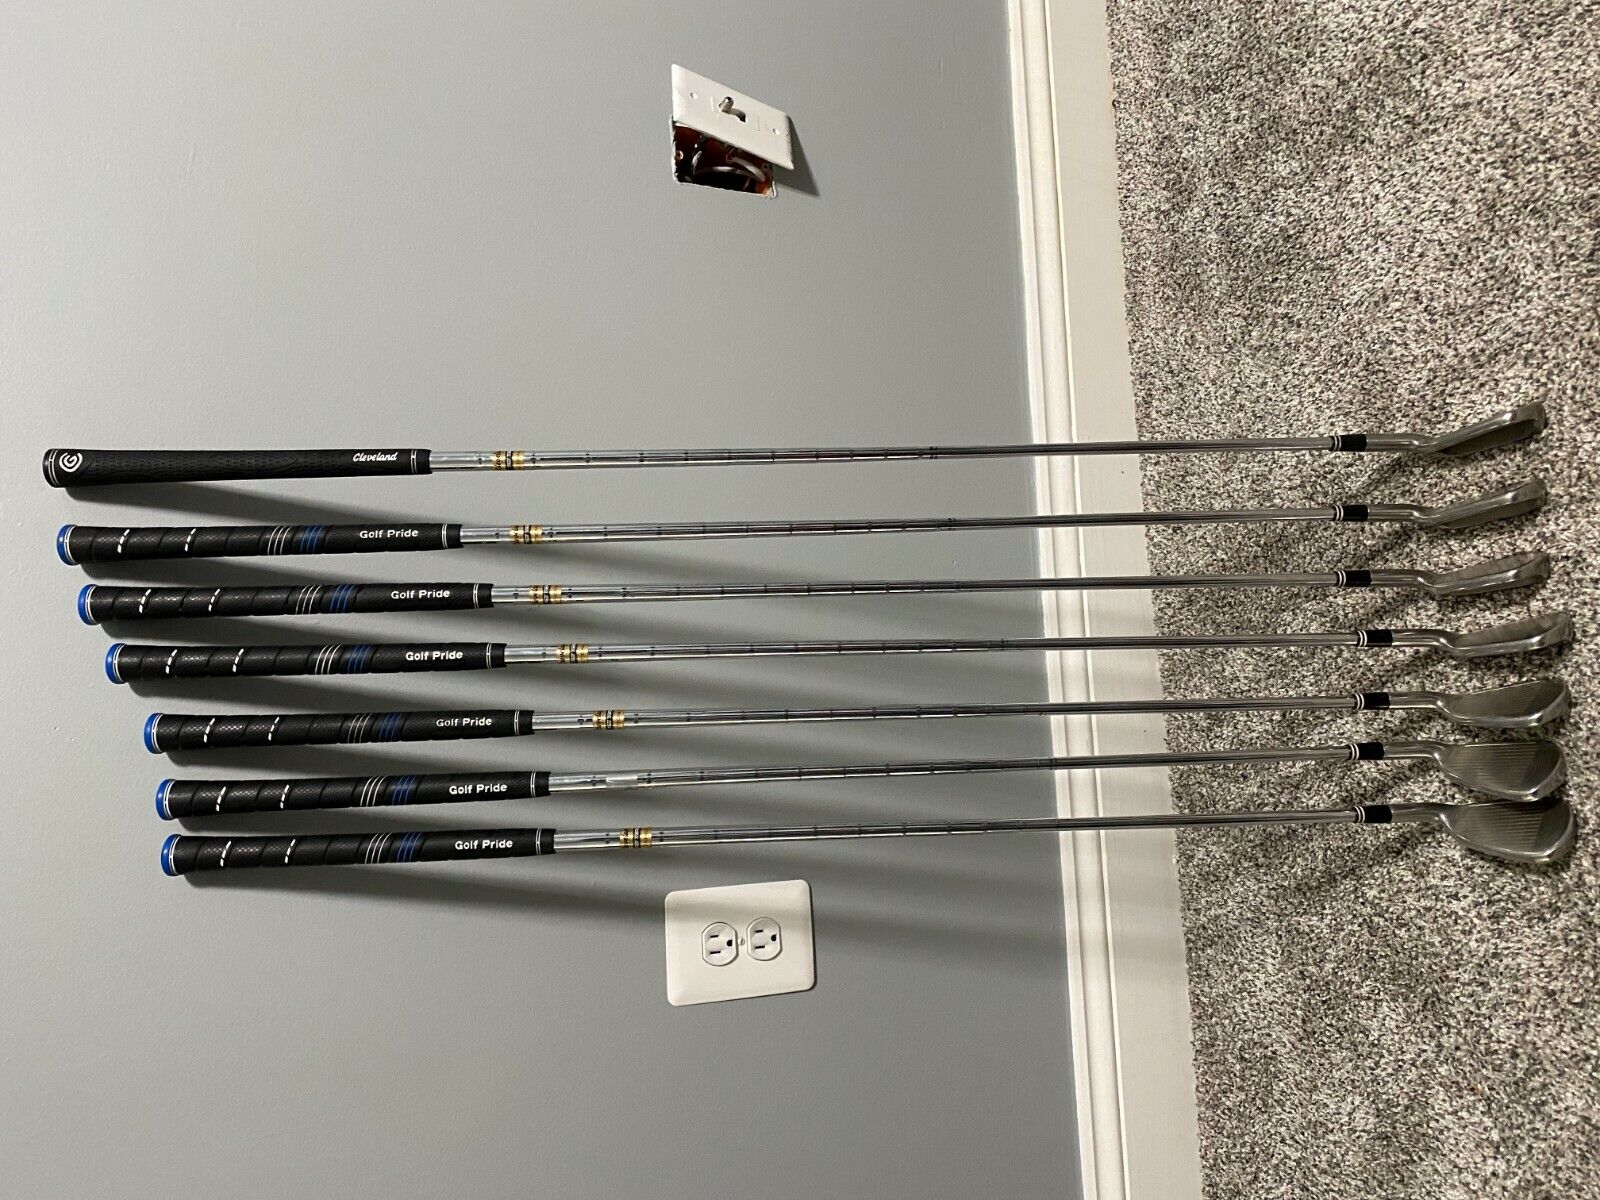 Cleveland TA5 Iron Set - Includes 3 Iron All new grips - Great Condition